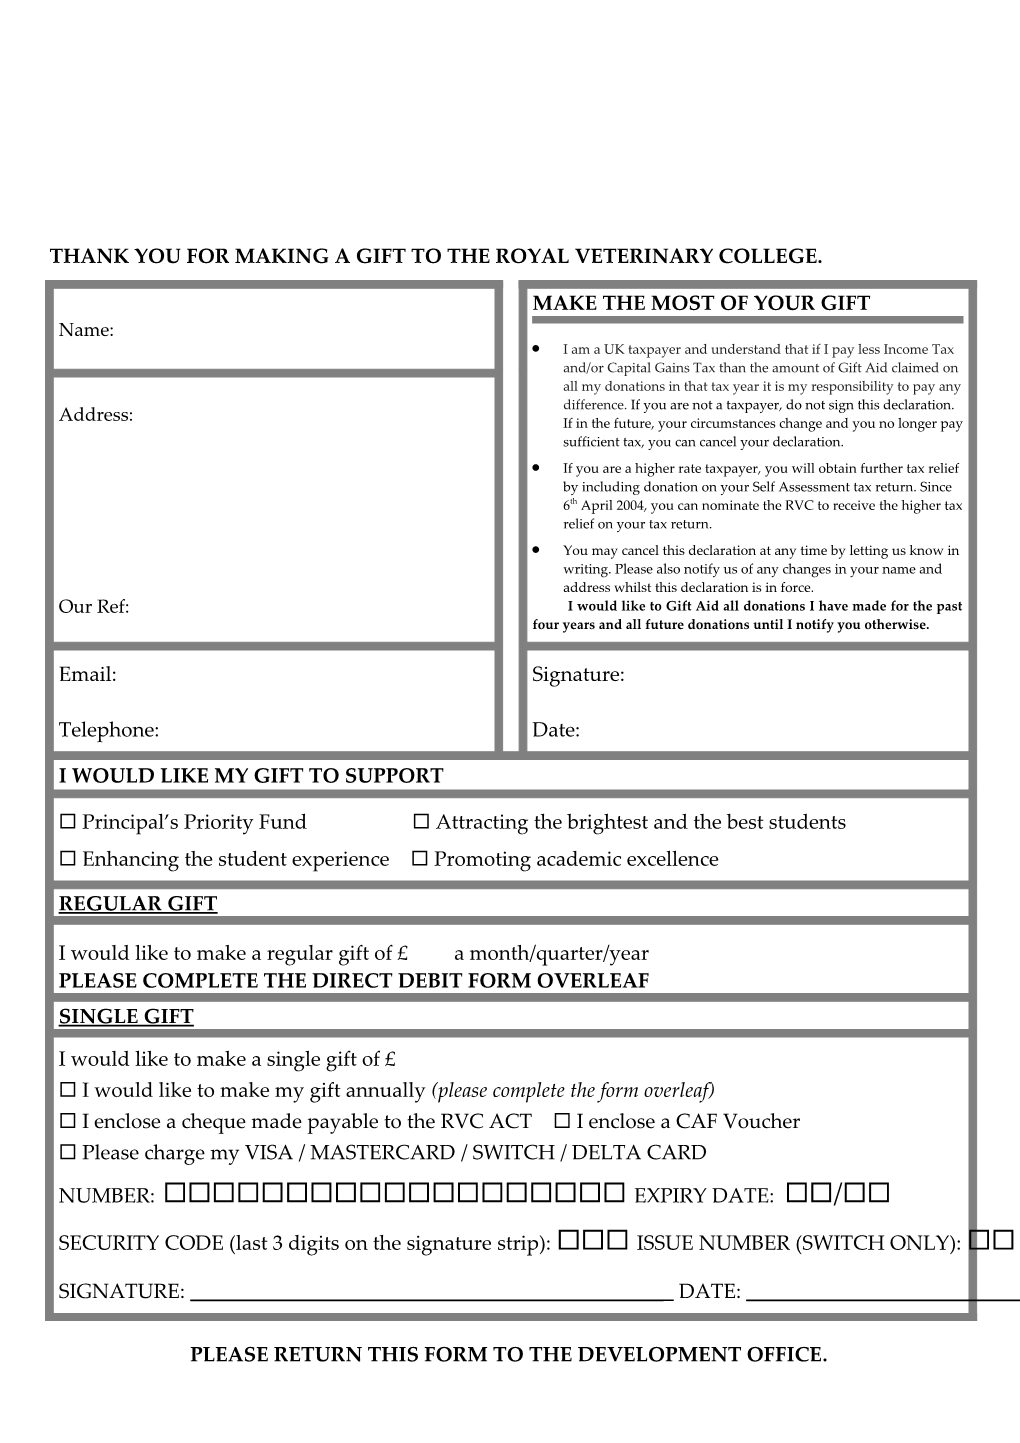 Please Return This Form to the Development Office